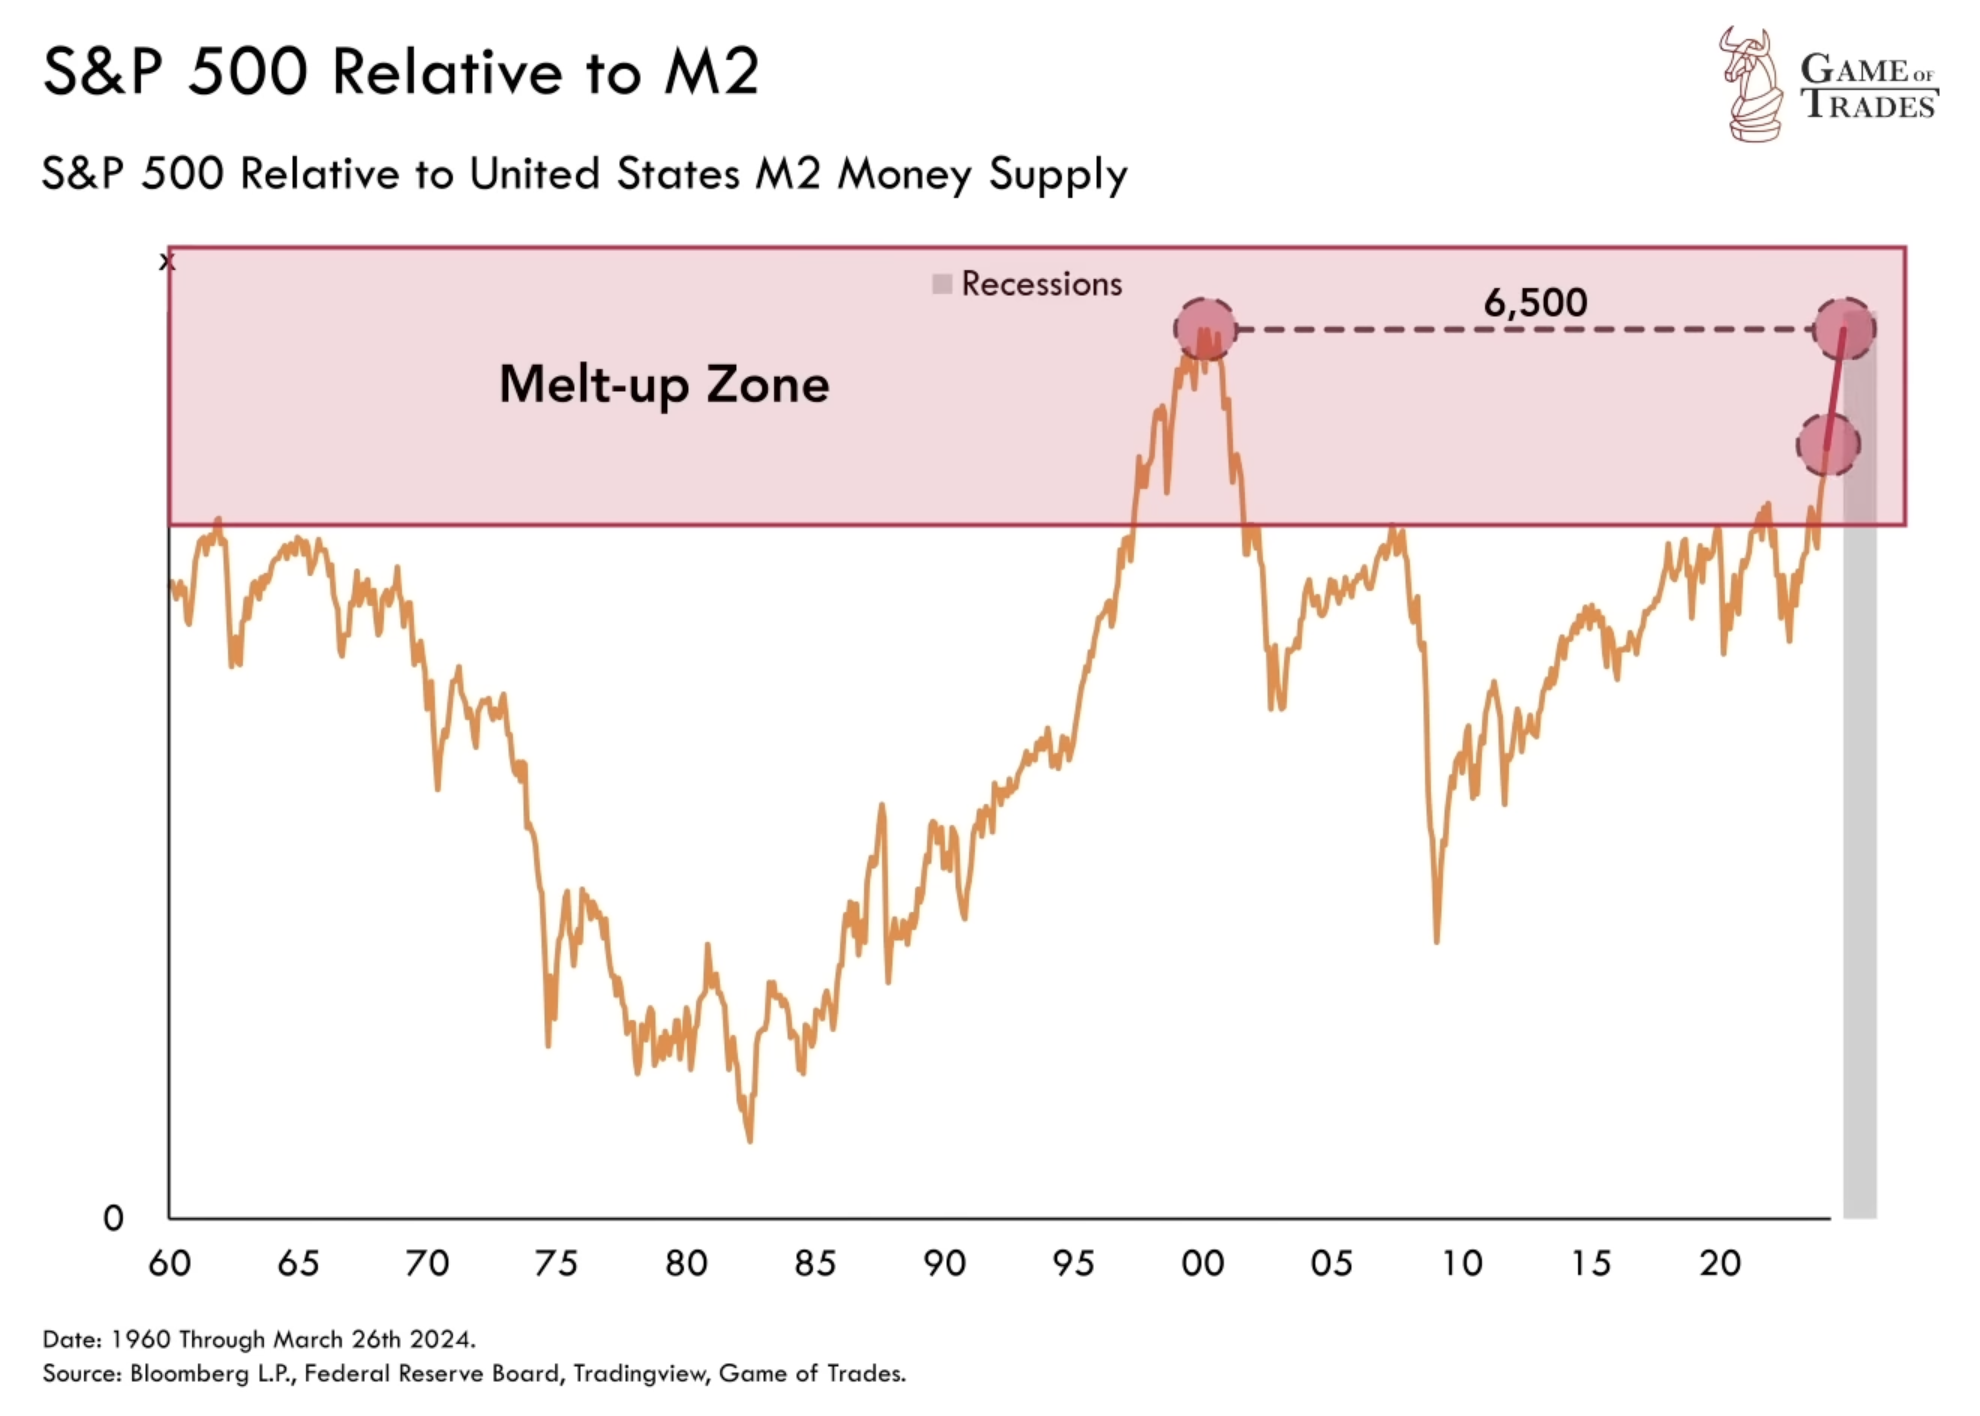 S&P 500 Relative to m2